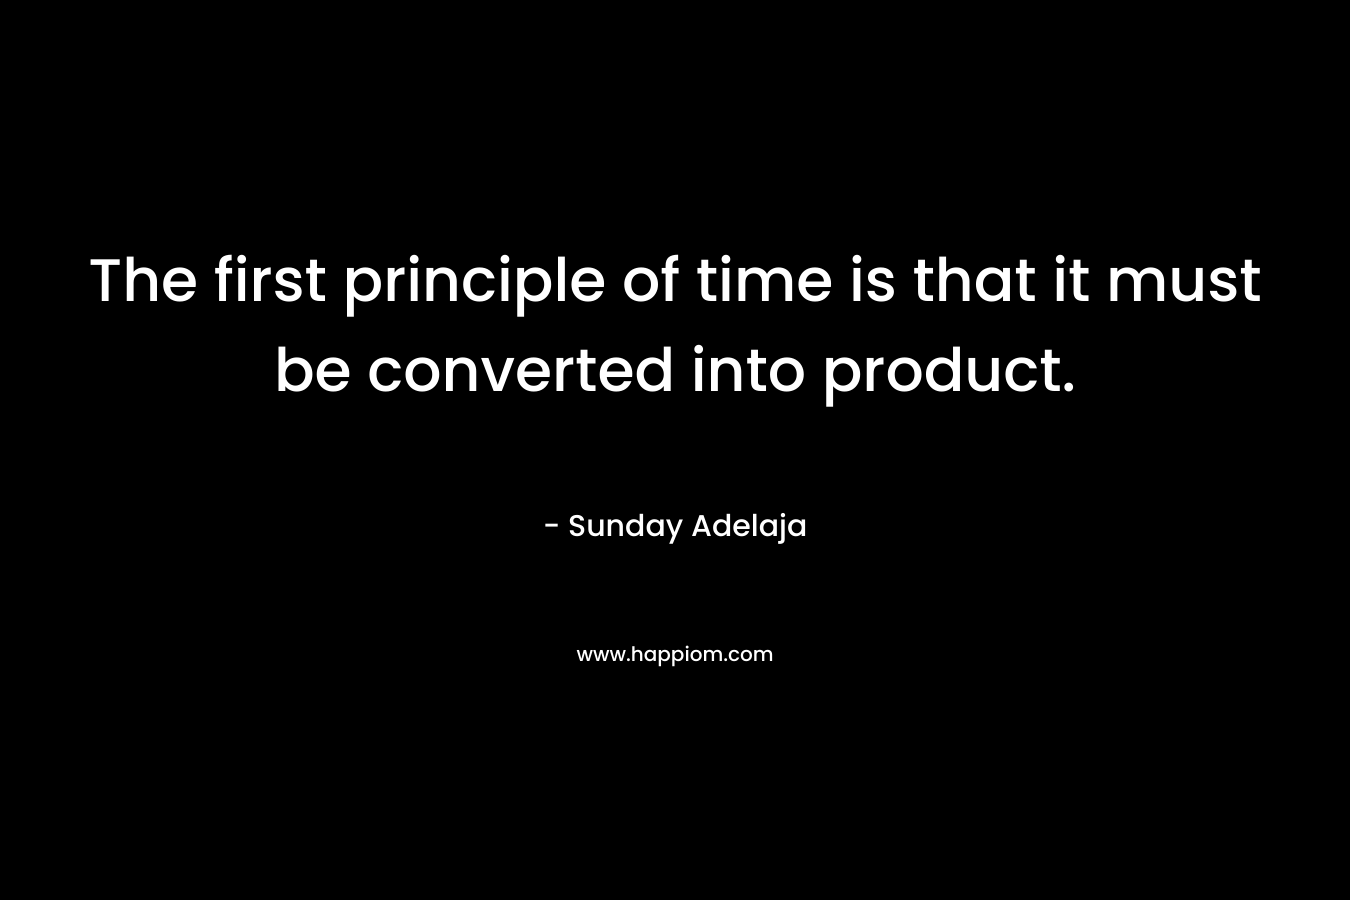 The first principle of time is that it must be converted into product.